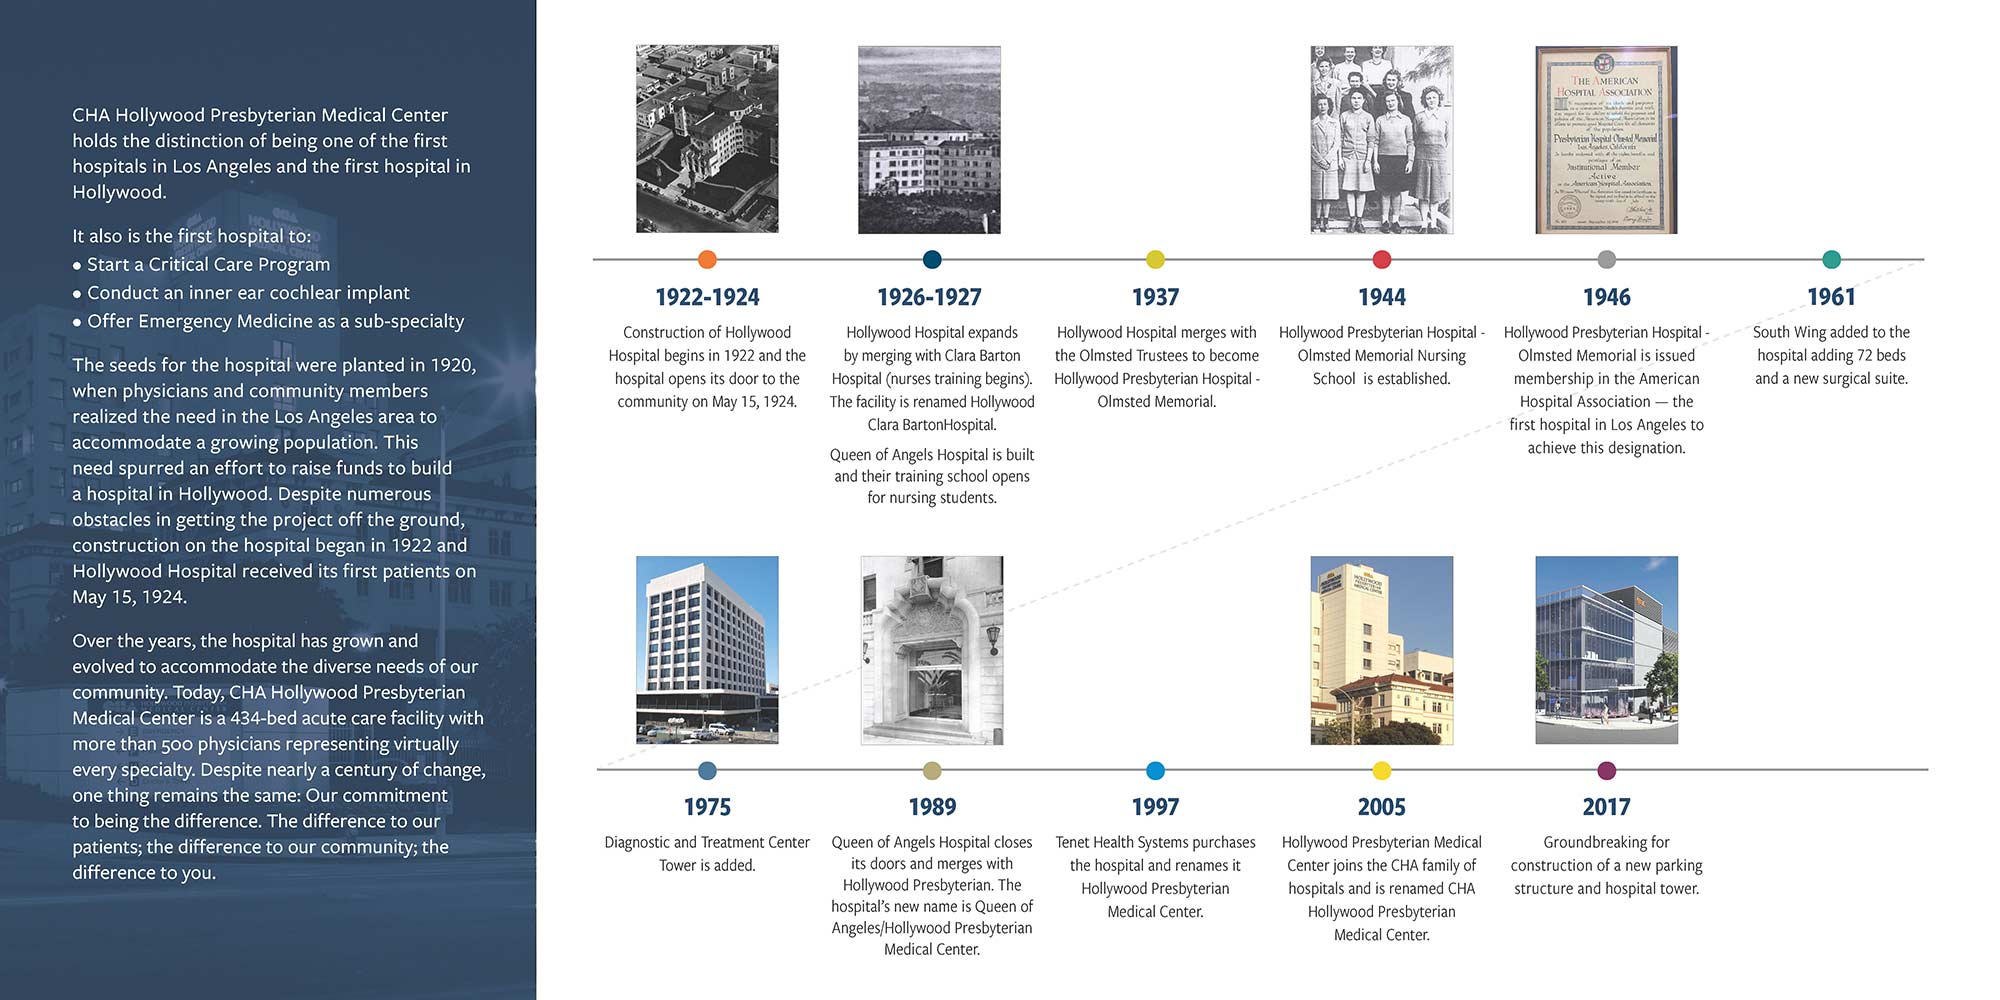 A large photo showing small images with captions describing milestones in the hospital's history, 1922 to 2017